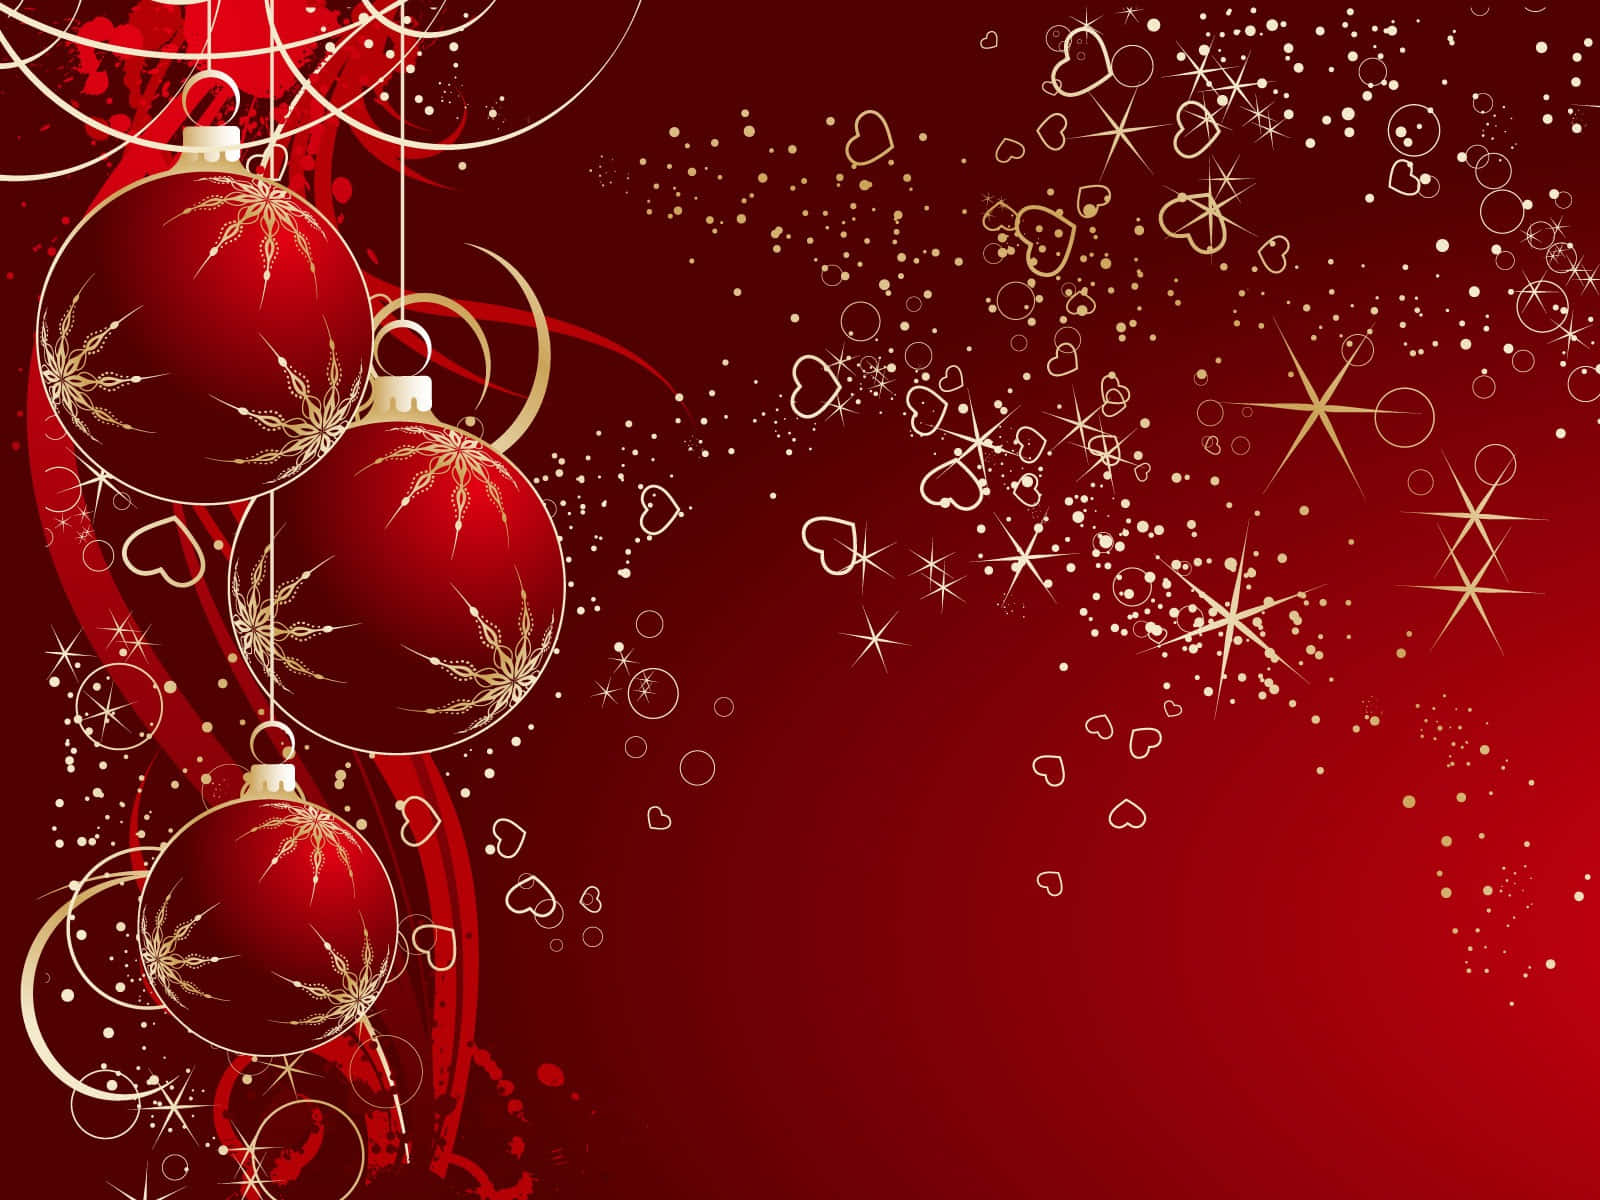 A festive Red Aesthetic Christmas in the heart of the holidays Wallpaper